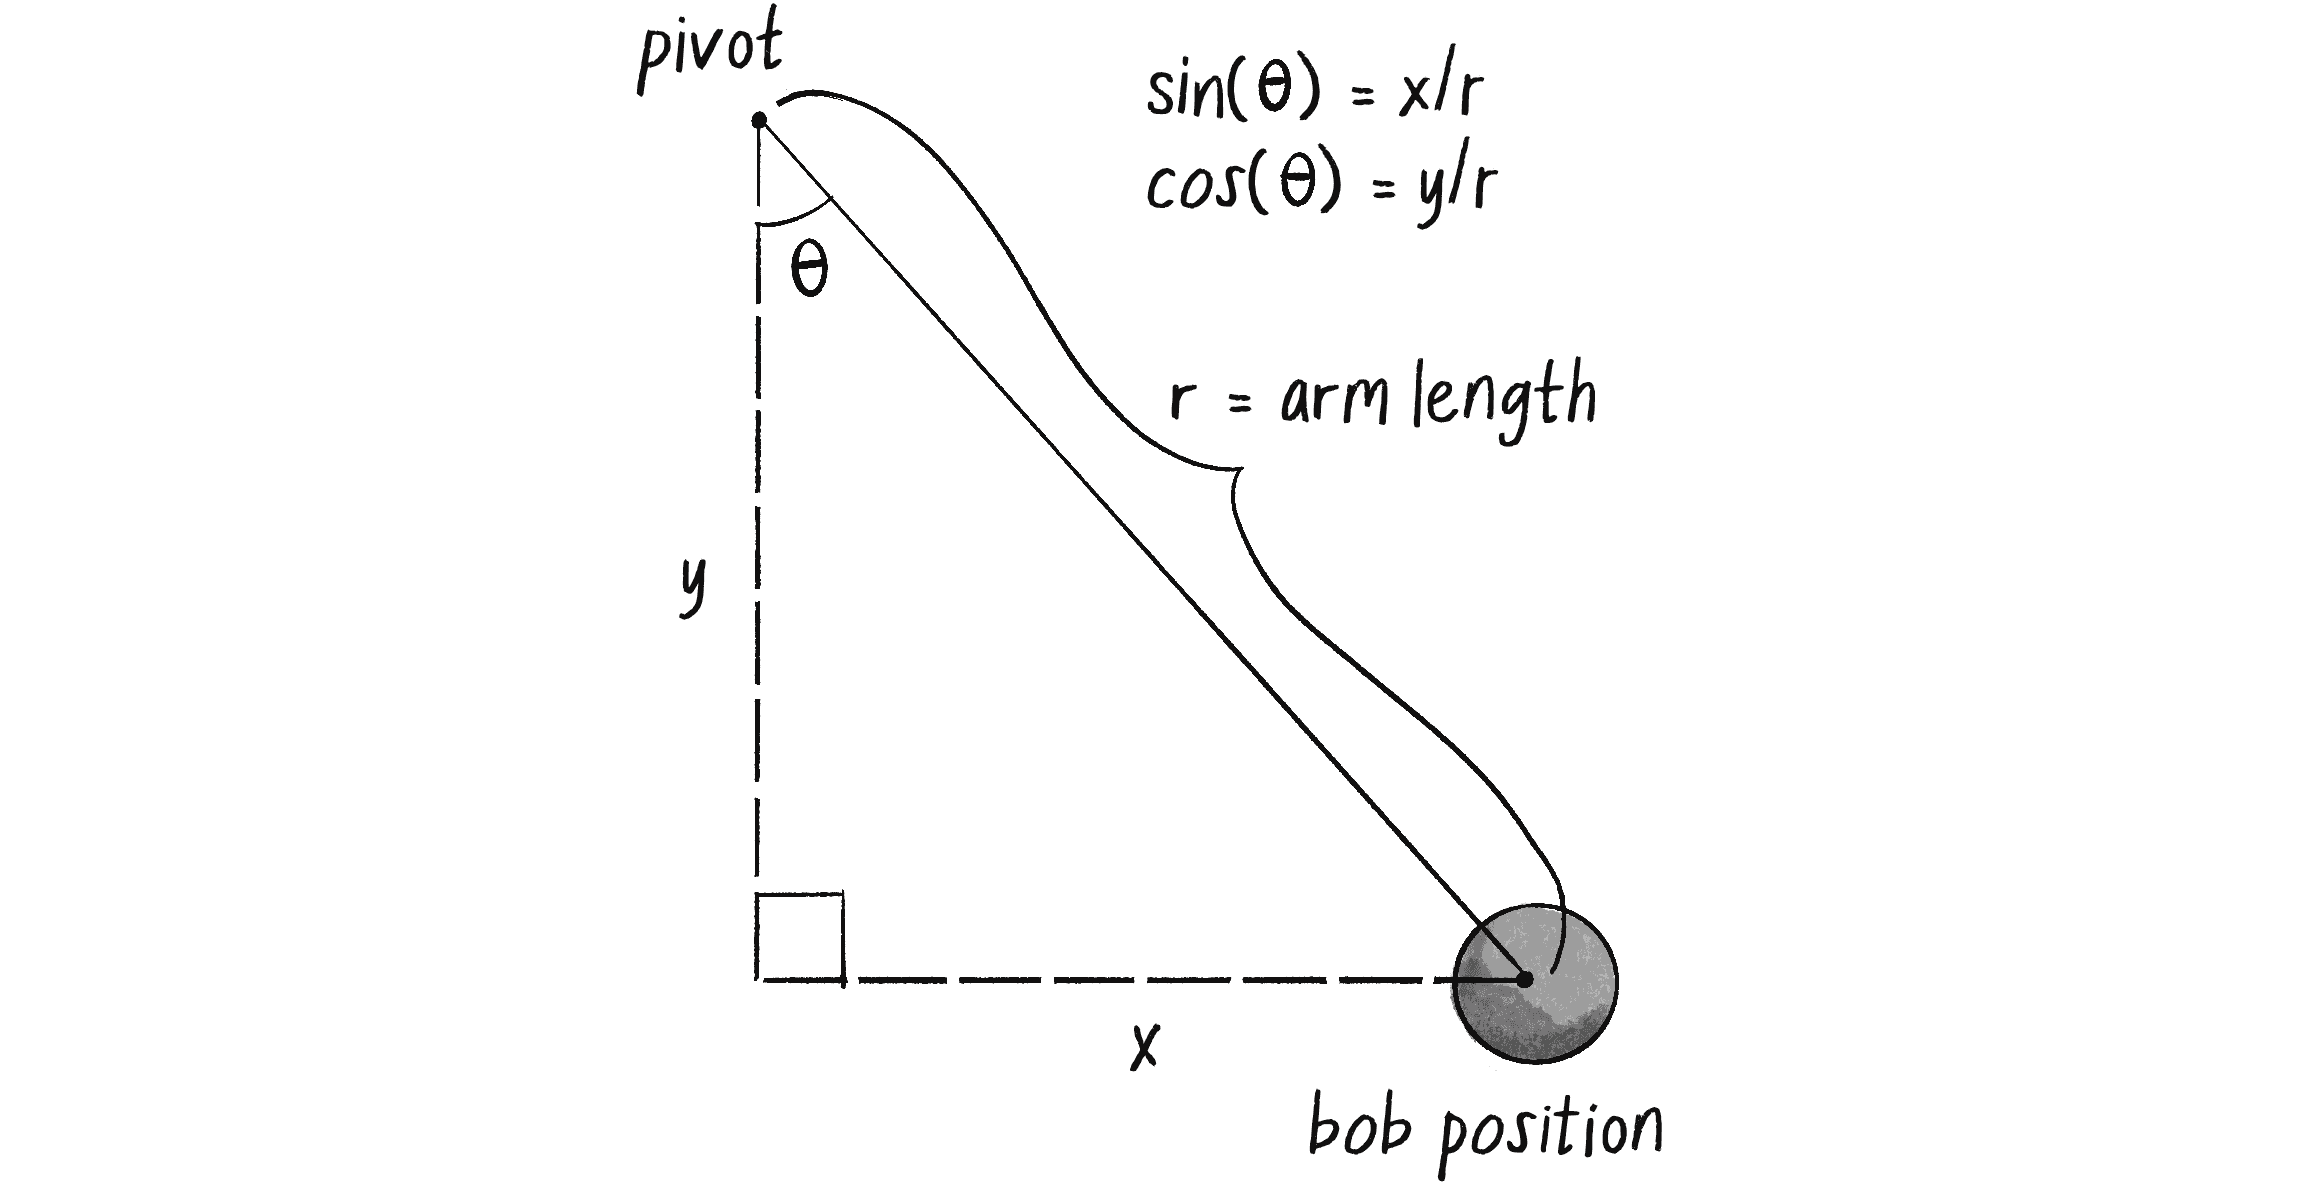 Figure 3.22: The bob position relative to the pivot in polar and Cartesian coordinates